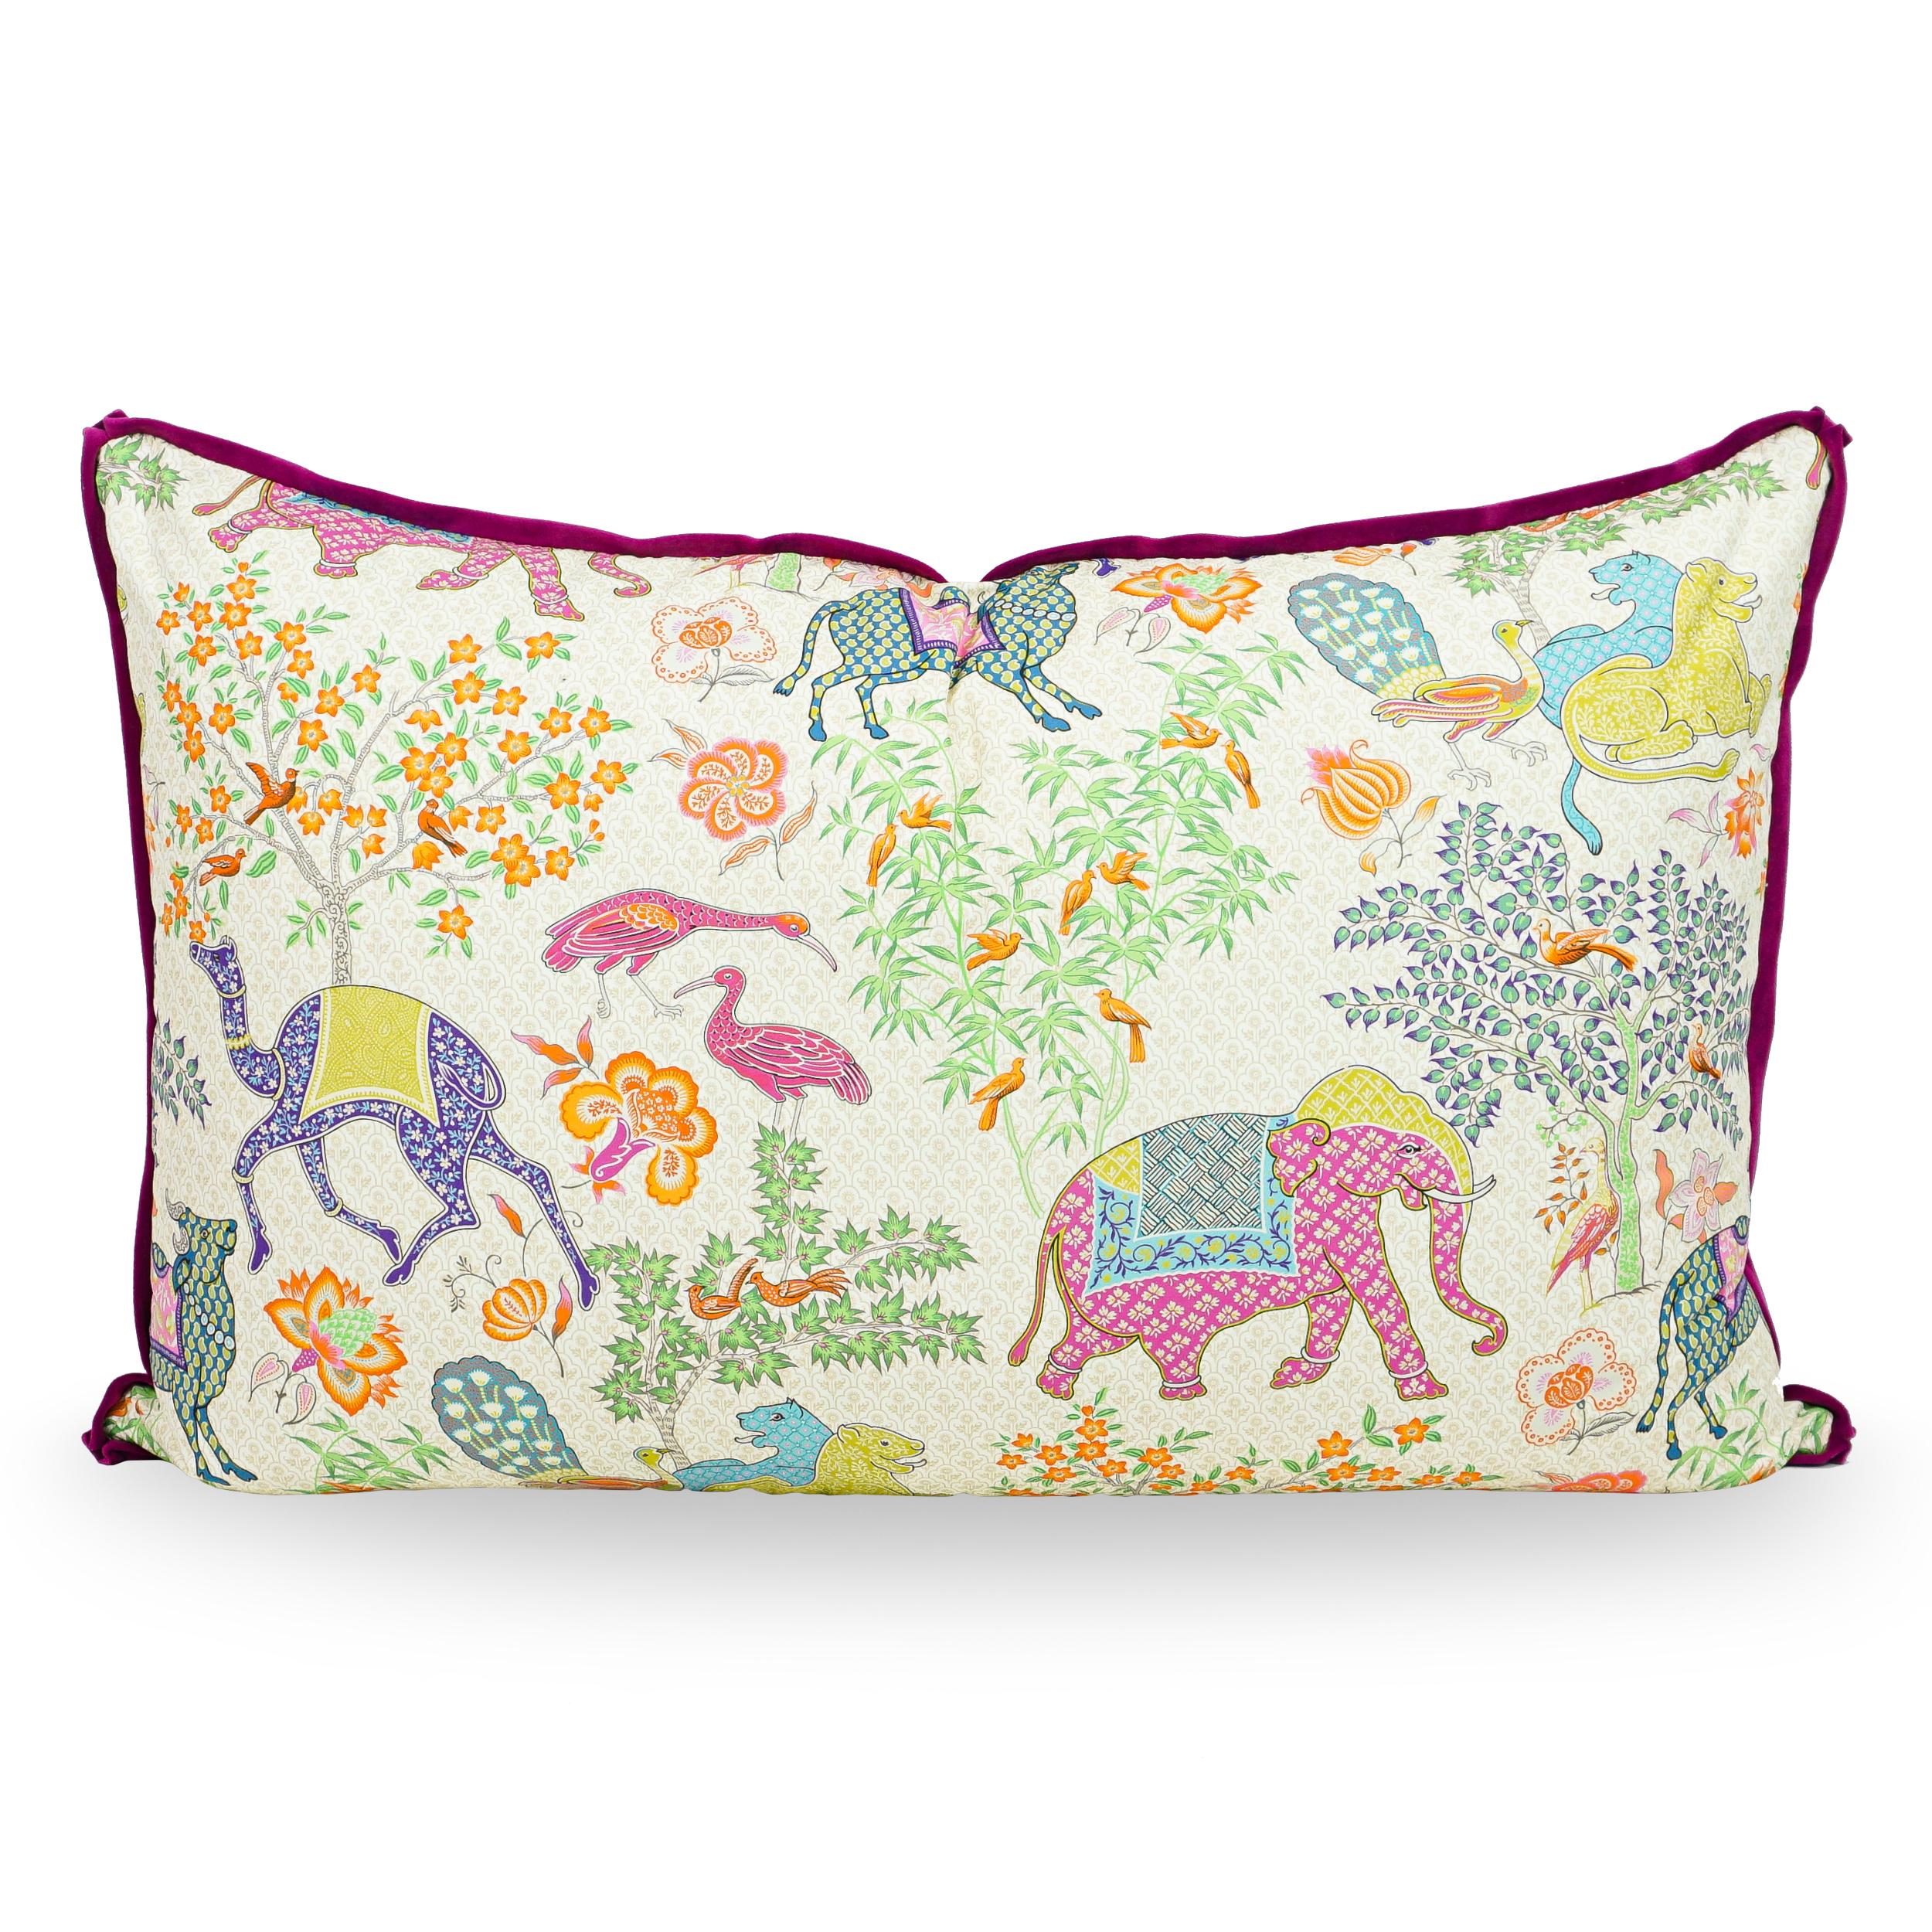 Contemporary Exotic Playful Oversized Pillow with Elephant Camel Printed Cotton & Pink Velvet For Sale